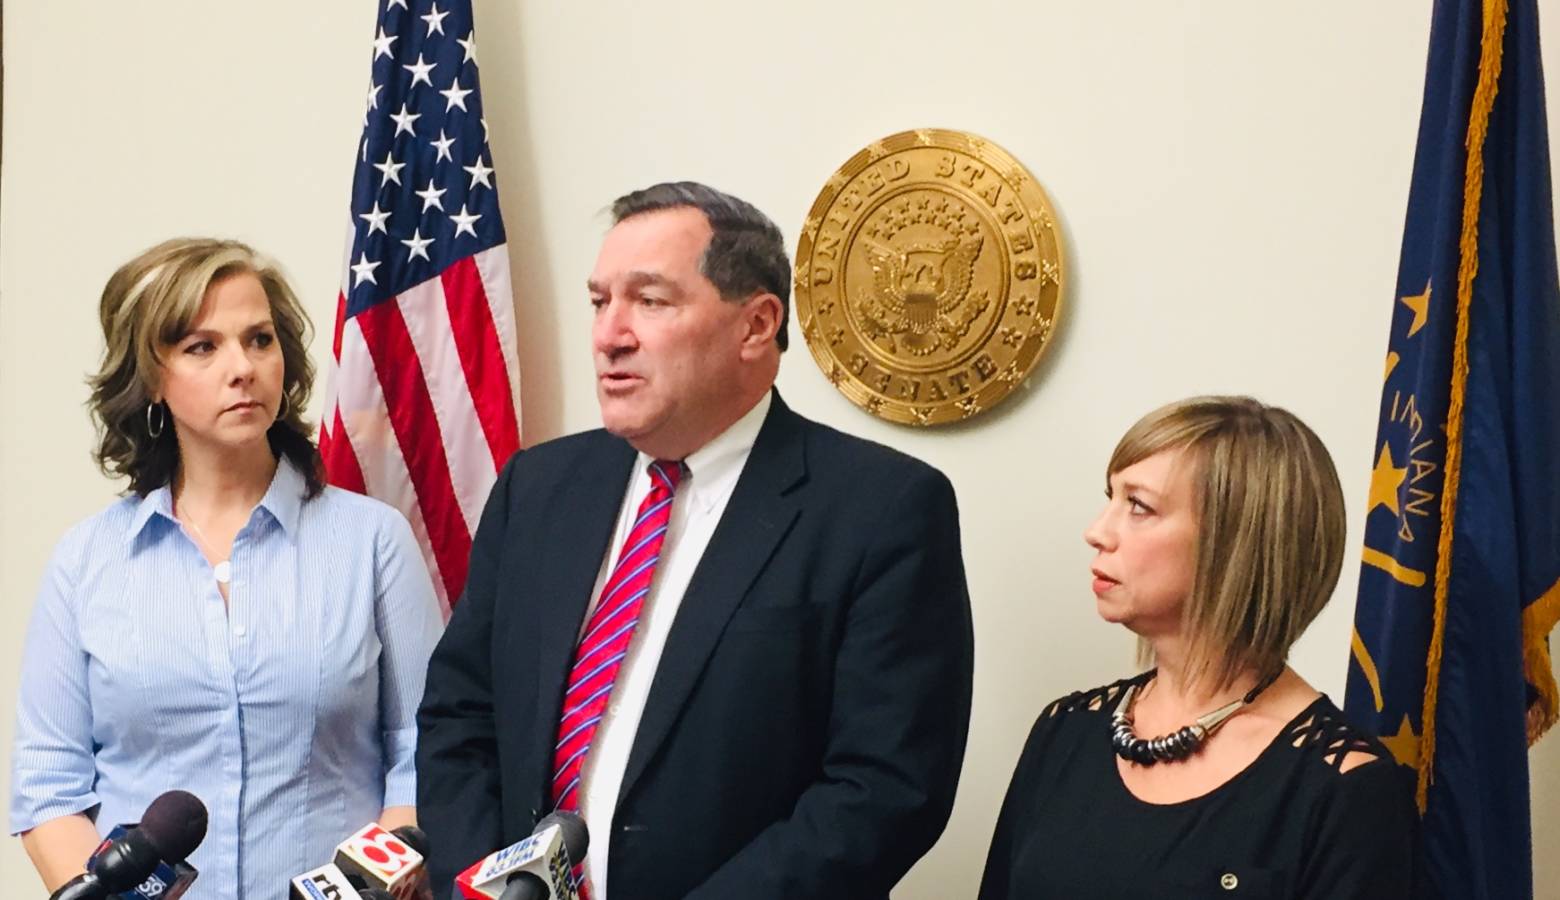 U.S. Sen. Joe Donnelly (D-Ind.) stands with If It Was Your Child moms. (Jill Sheridan/IPB News)